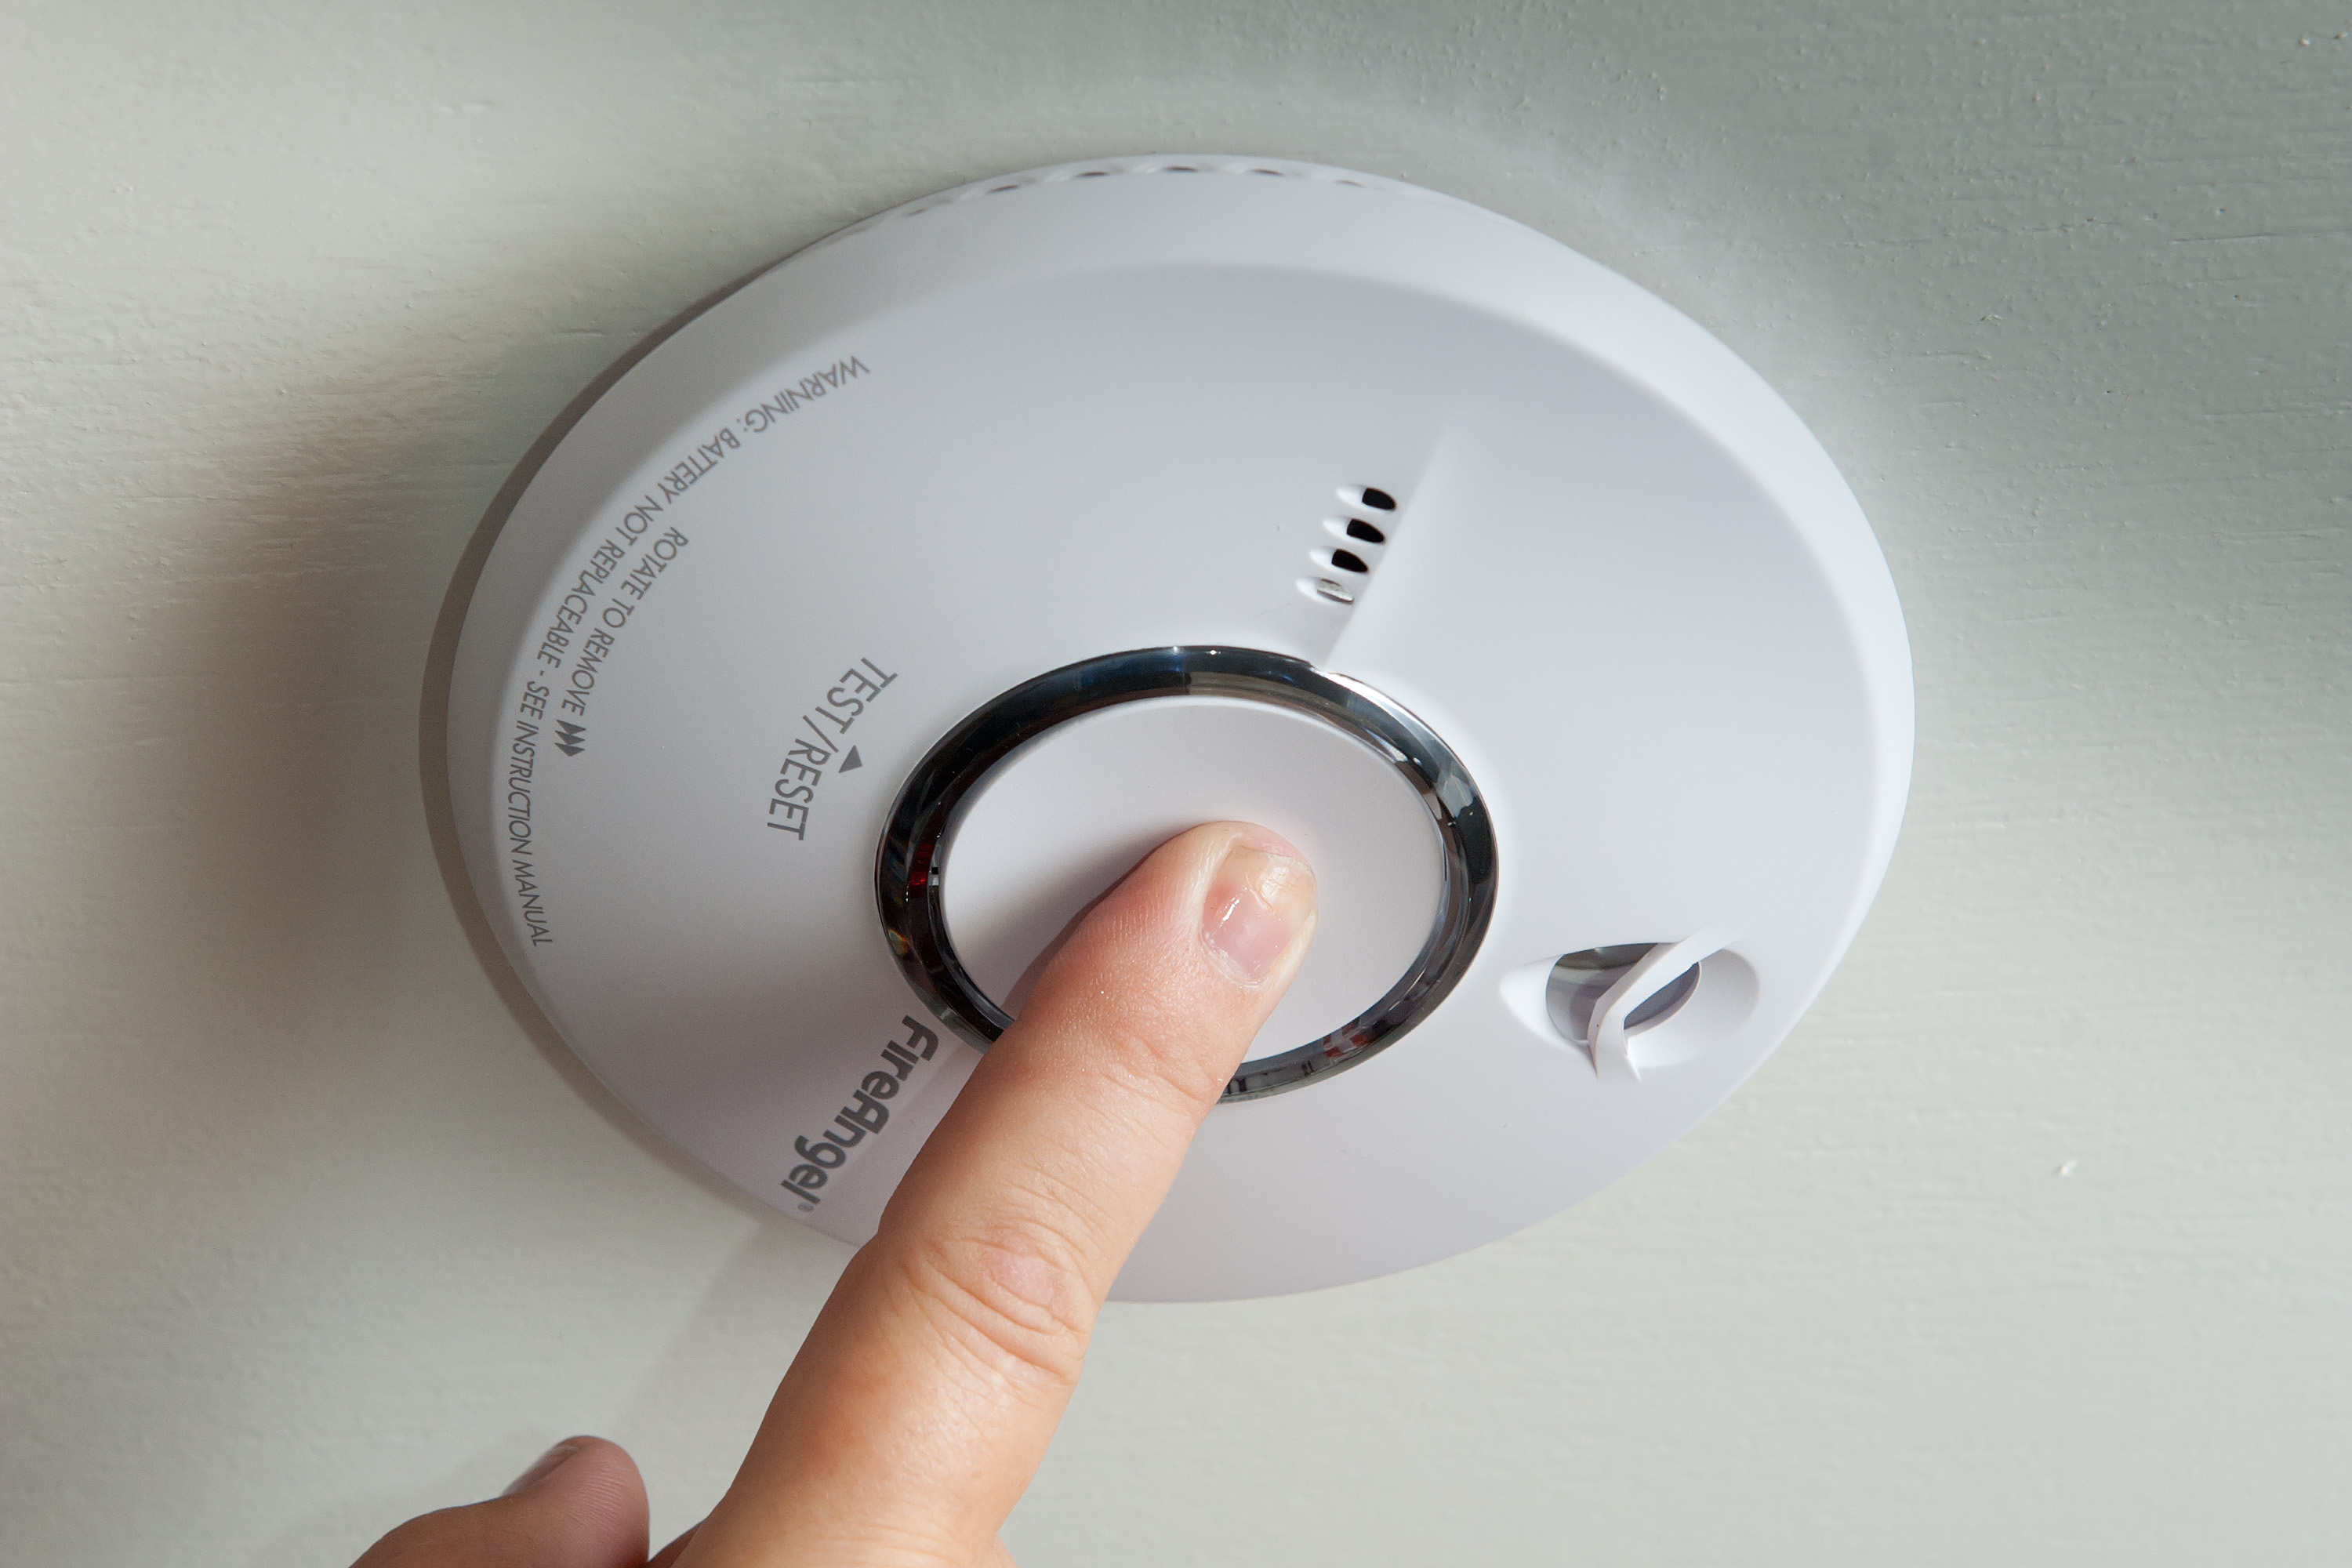 A picture of a smoke alarm that is being tested